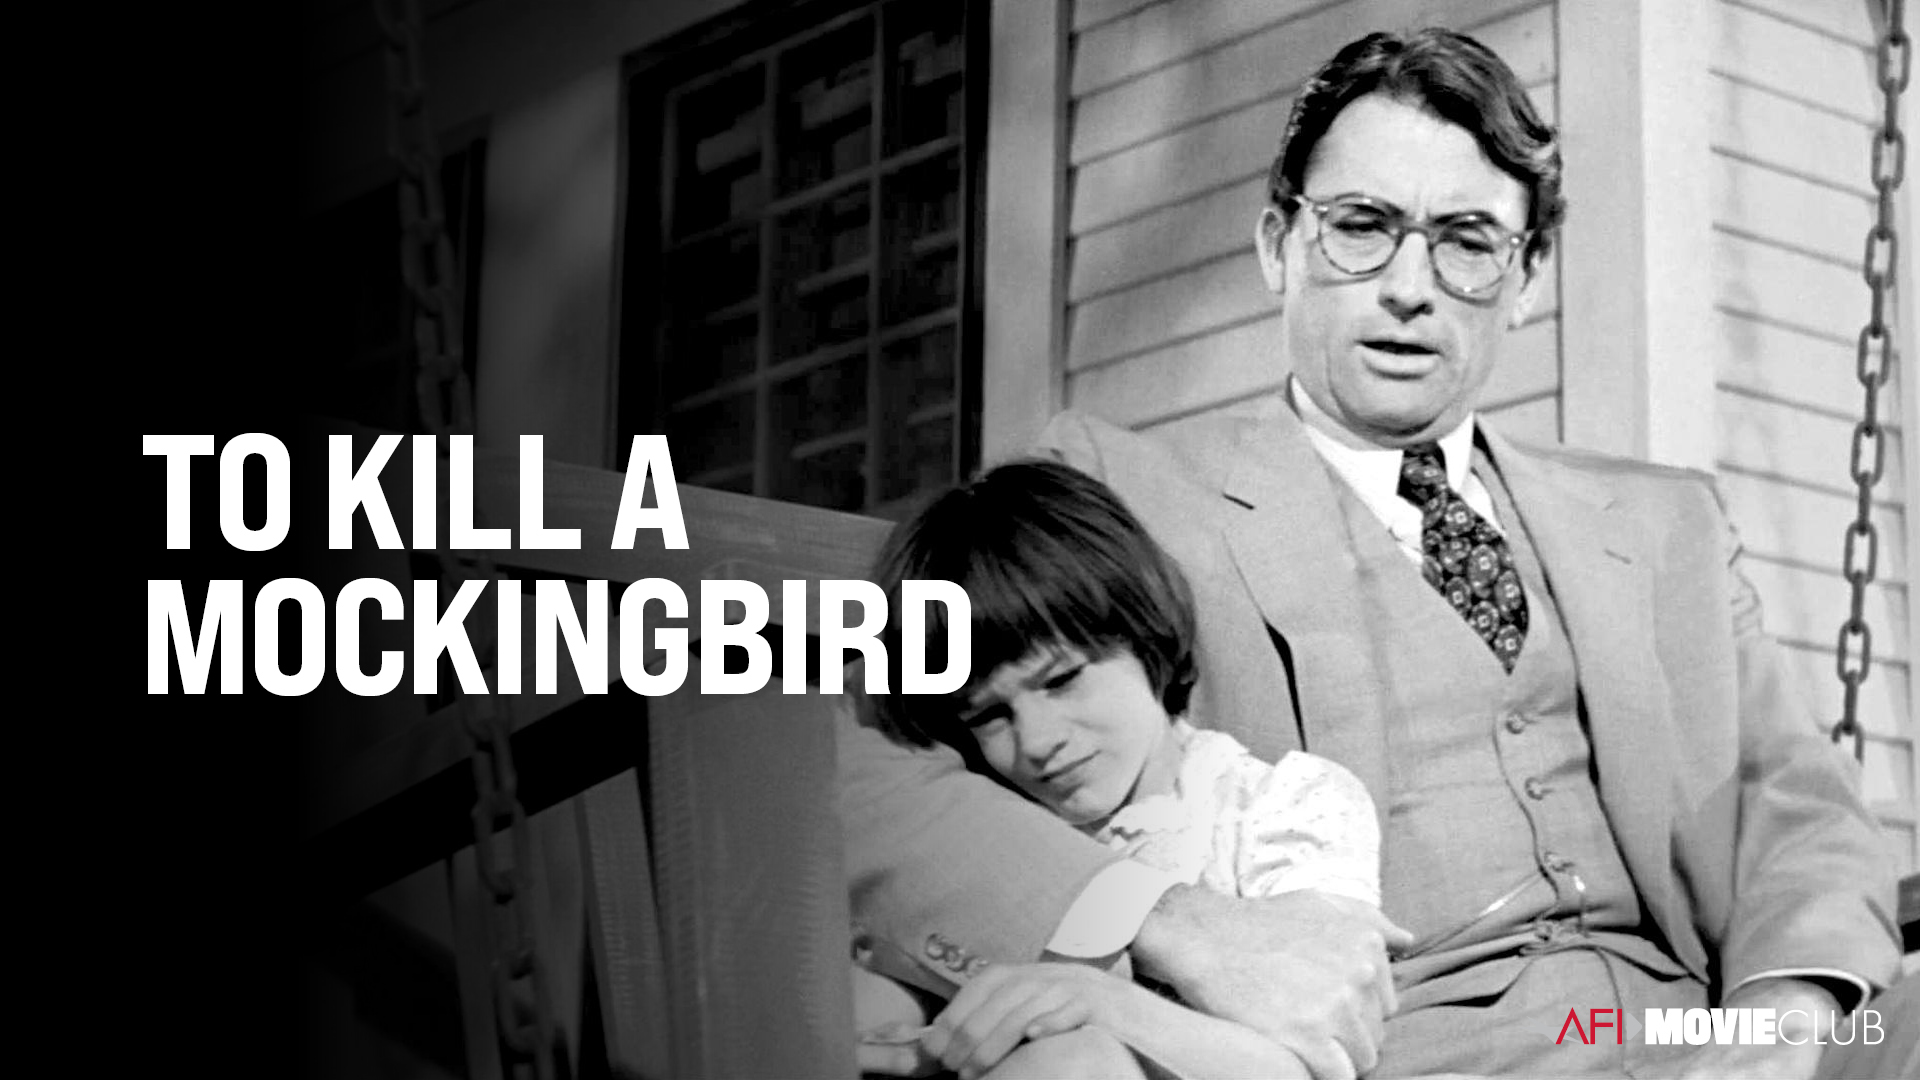 To Kill A Mocking Bird Film Still - Gregory Peck and Mary Badham